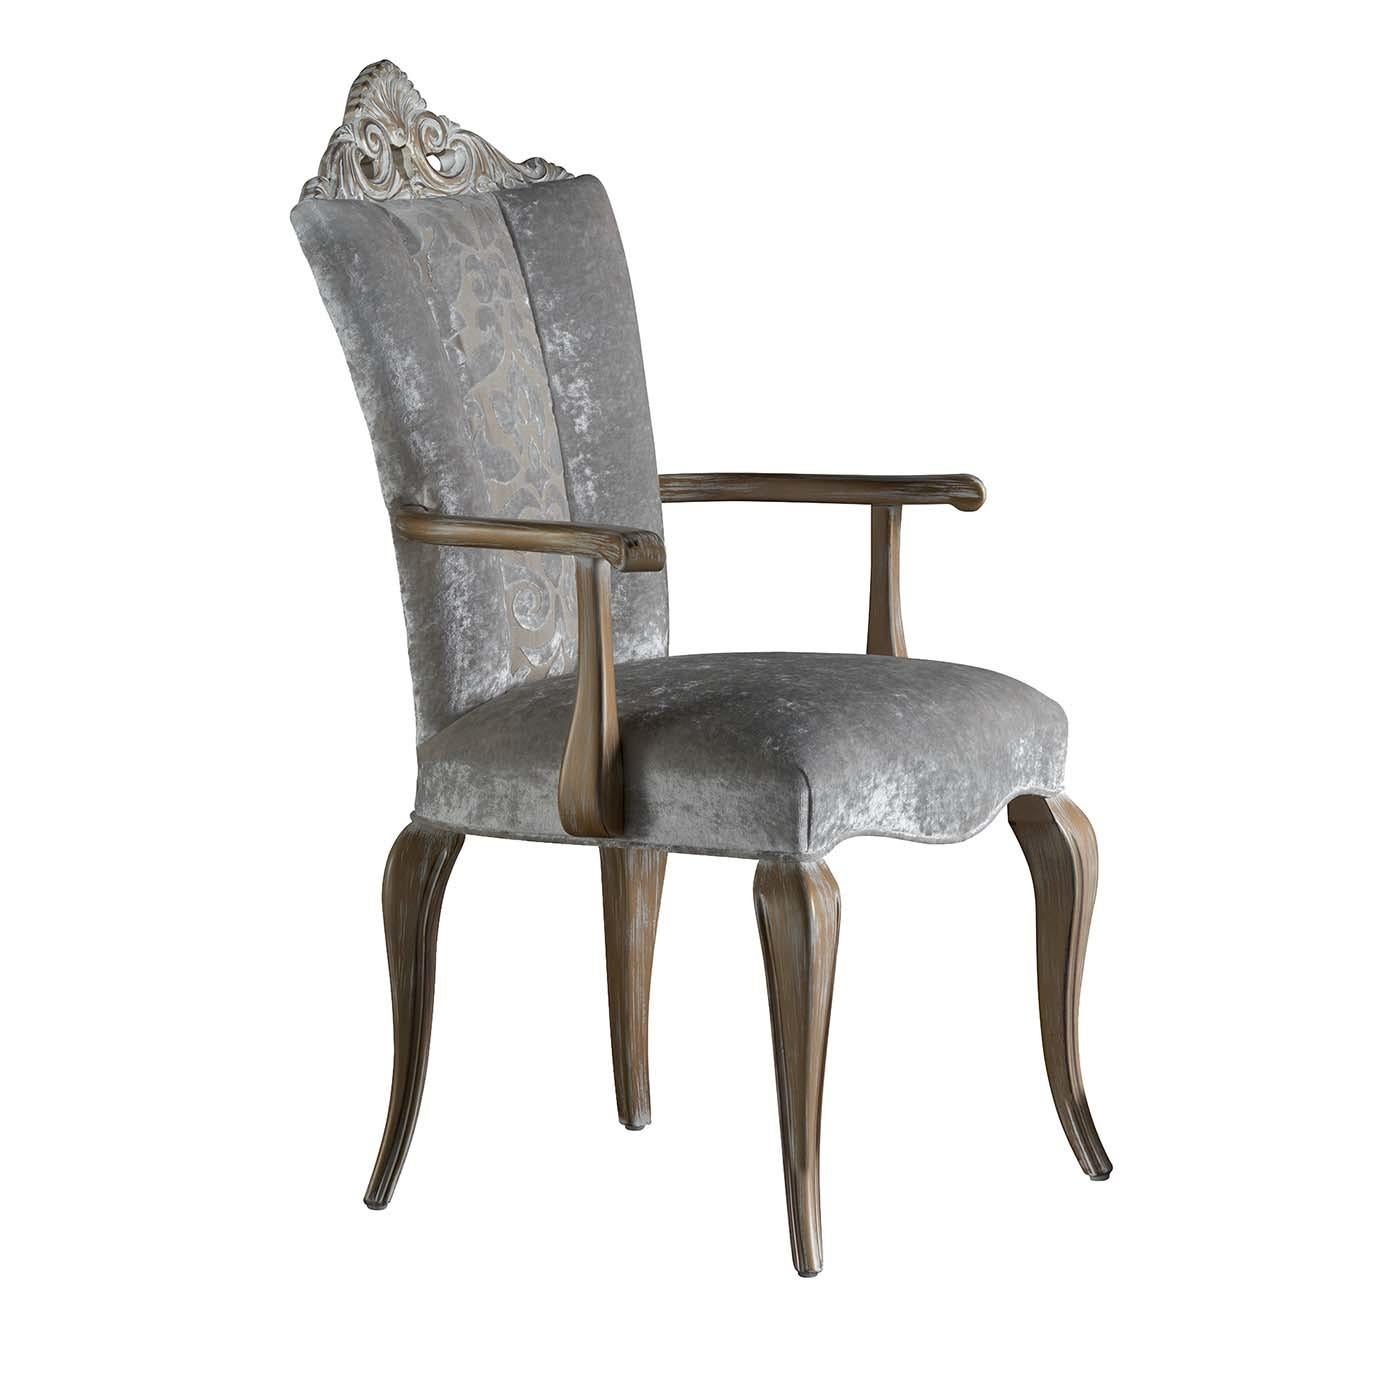 Baroque style dining chair with armrests, rich in sophisticated detail. The ideal addition to the decor of your dining room or living room. The dining chair with armrests has a wooden frame with decapè finish, matching perfectly with the soft and